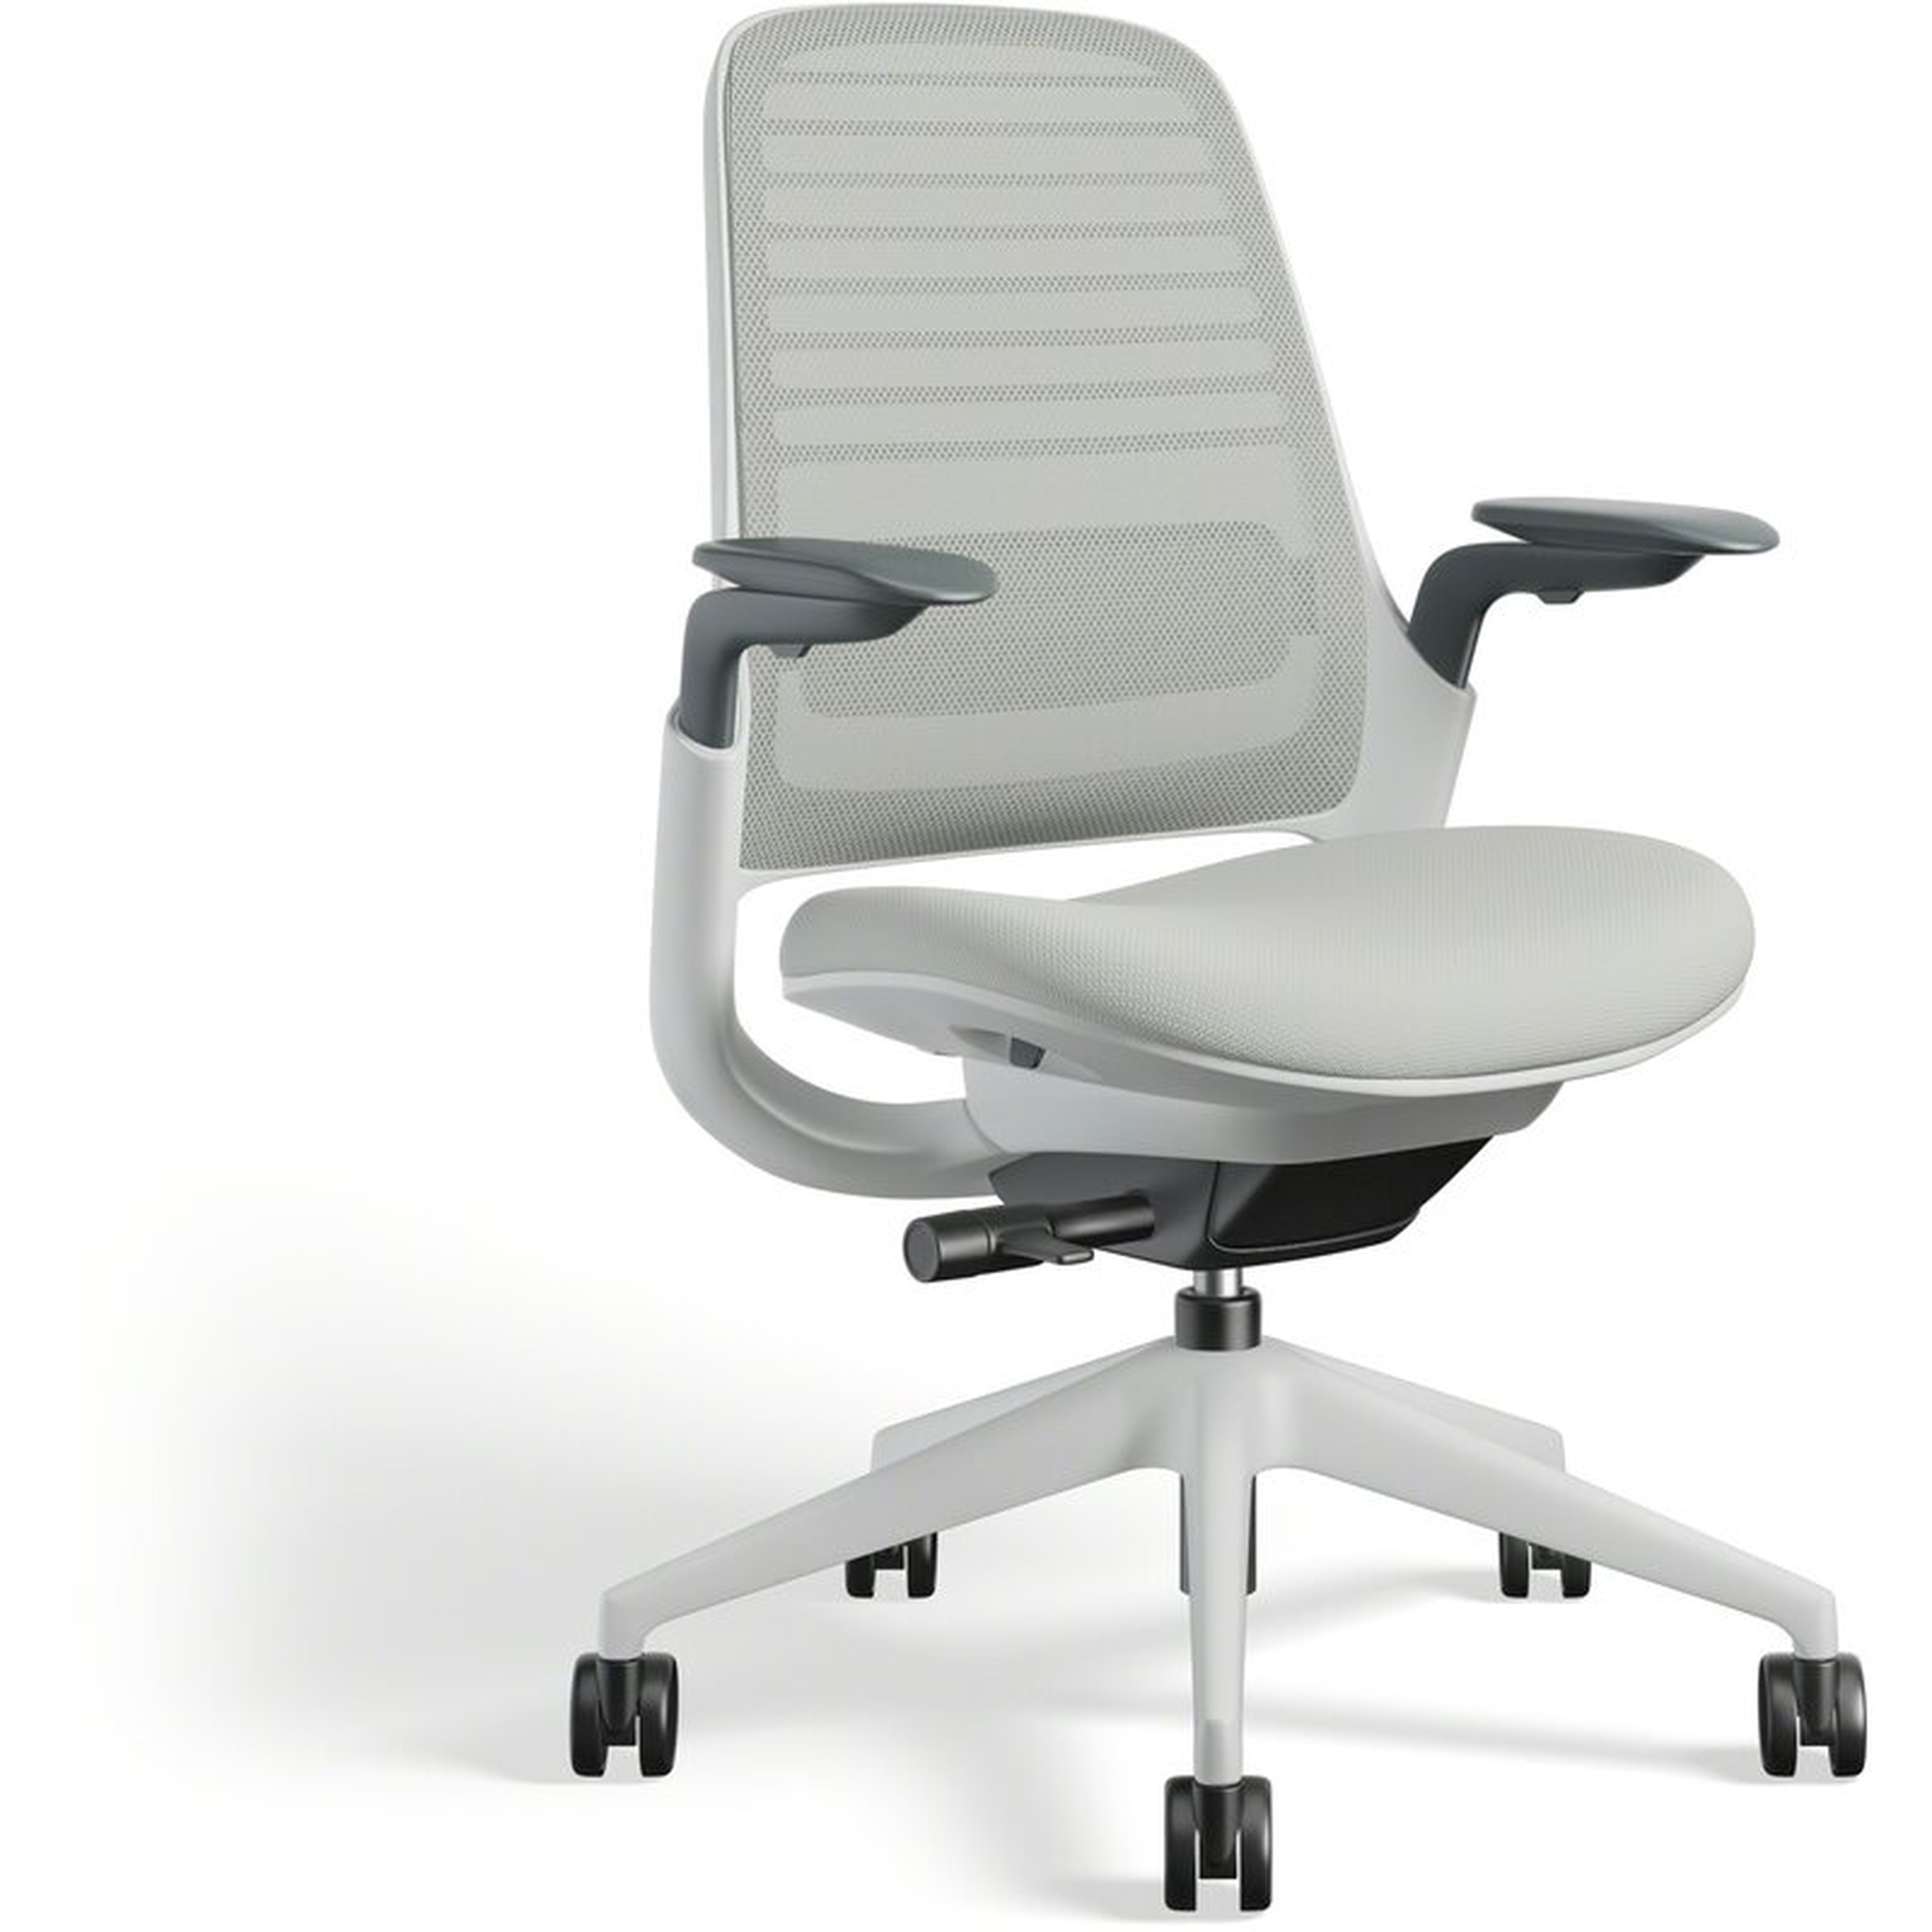 Steelcase Series 1 Ergonomic Mesh Task Chair Frame Color: Seagull, Upholstery Color: Nickel - Perigold